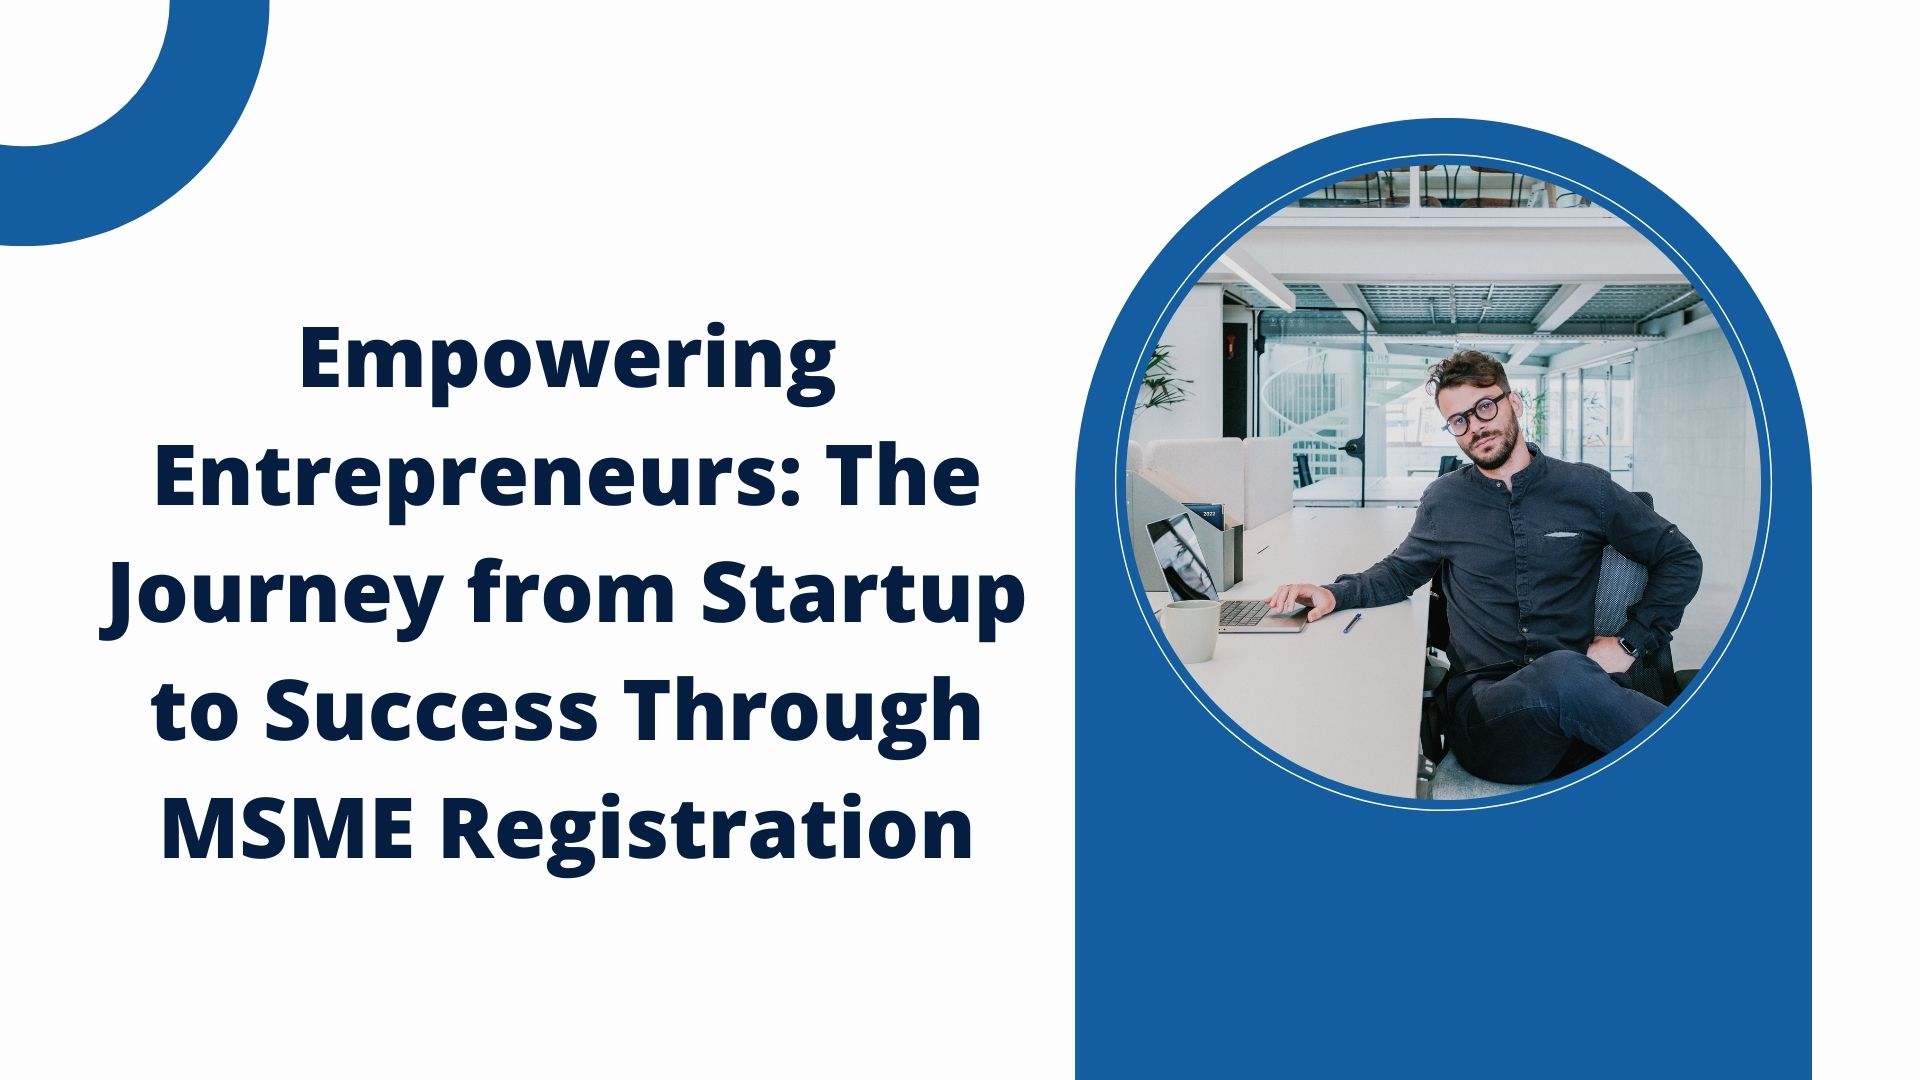 Empowering Entrepreneurs: The Journey from Startup to Success Through MSME Registration